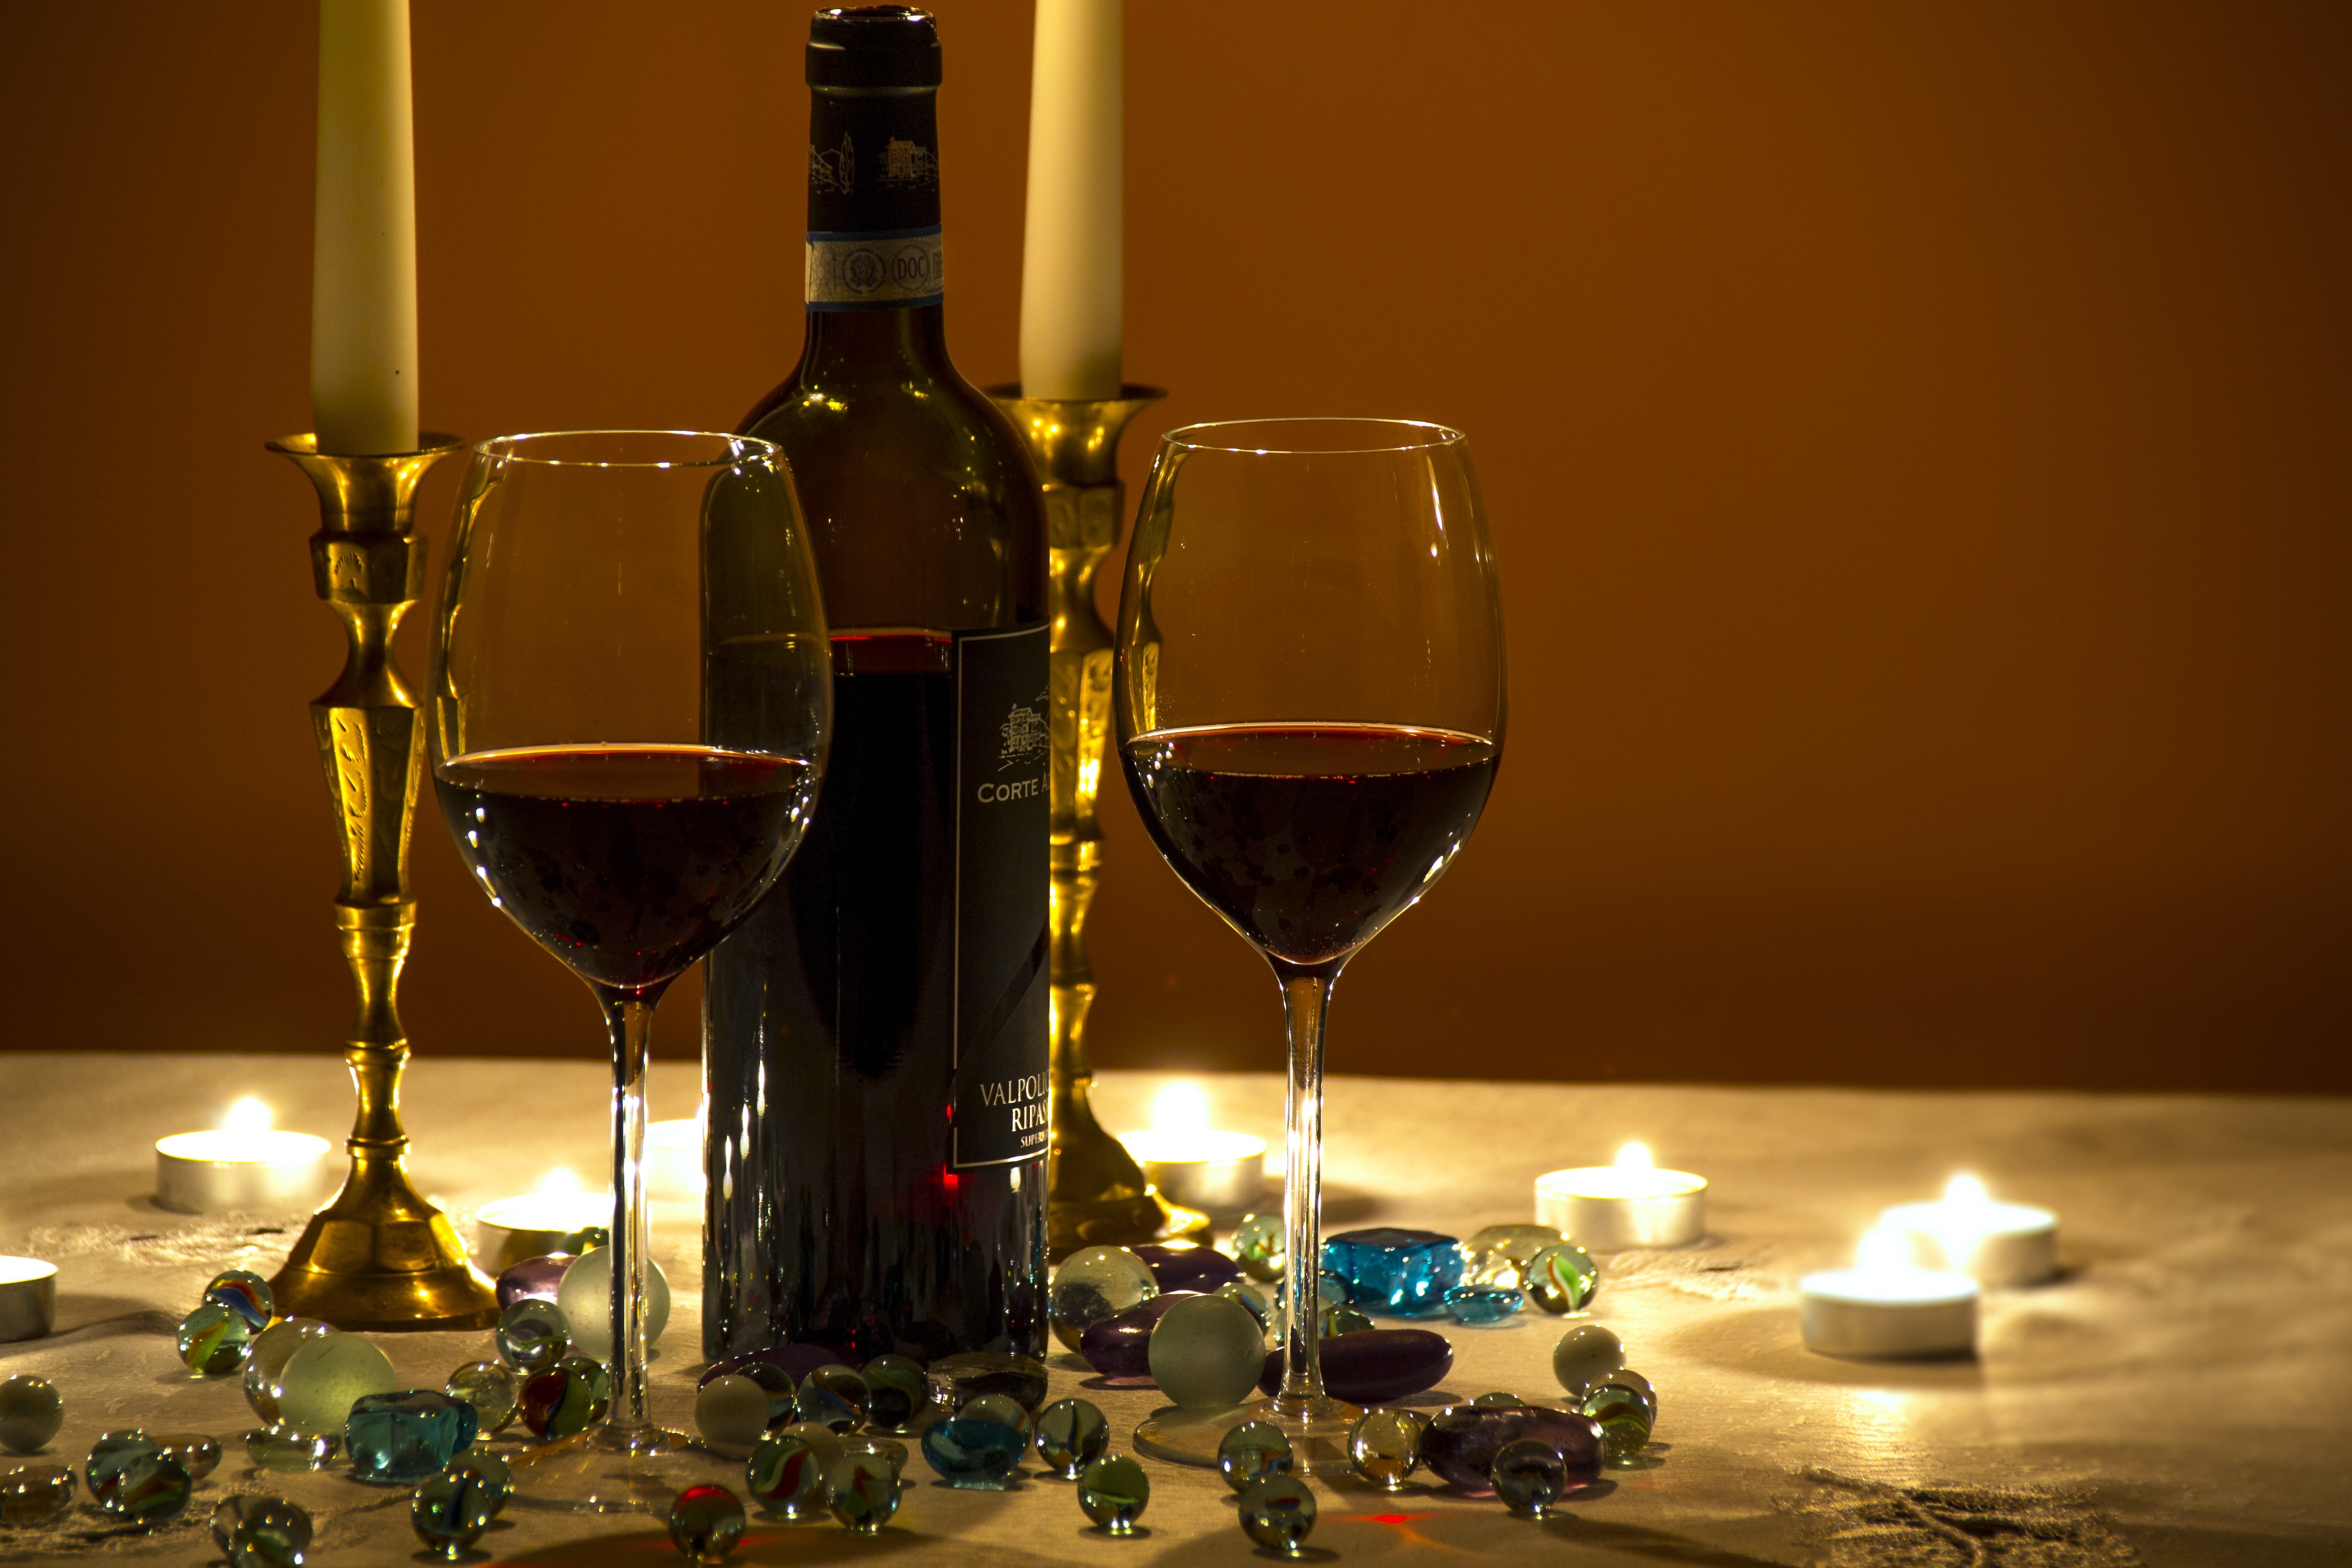 photo of wine bottle with two wine glasses with wine inside surrounded with marble toys and tealight candle